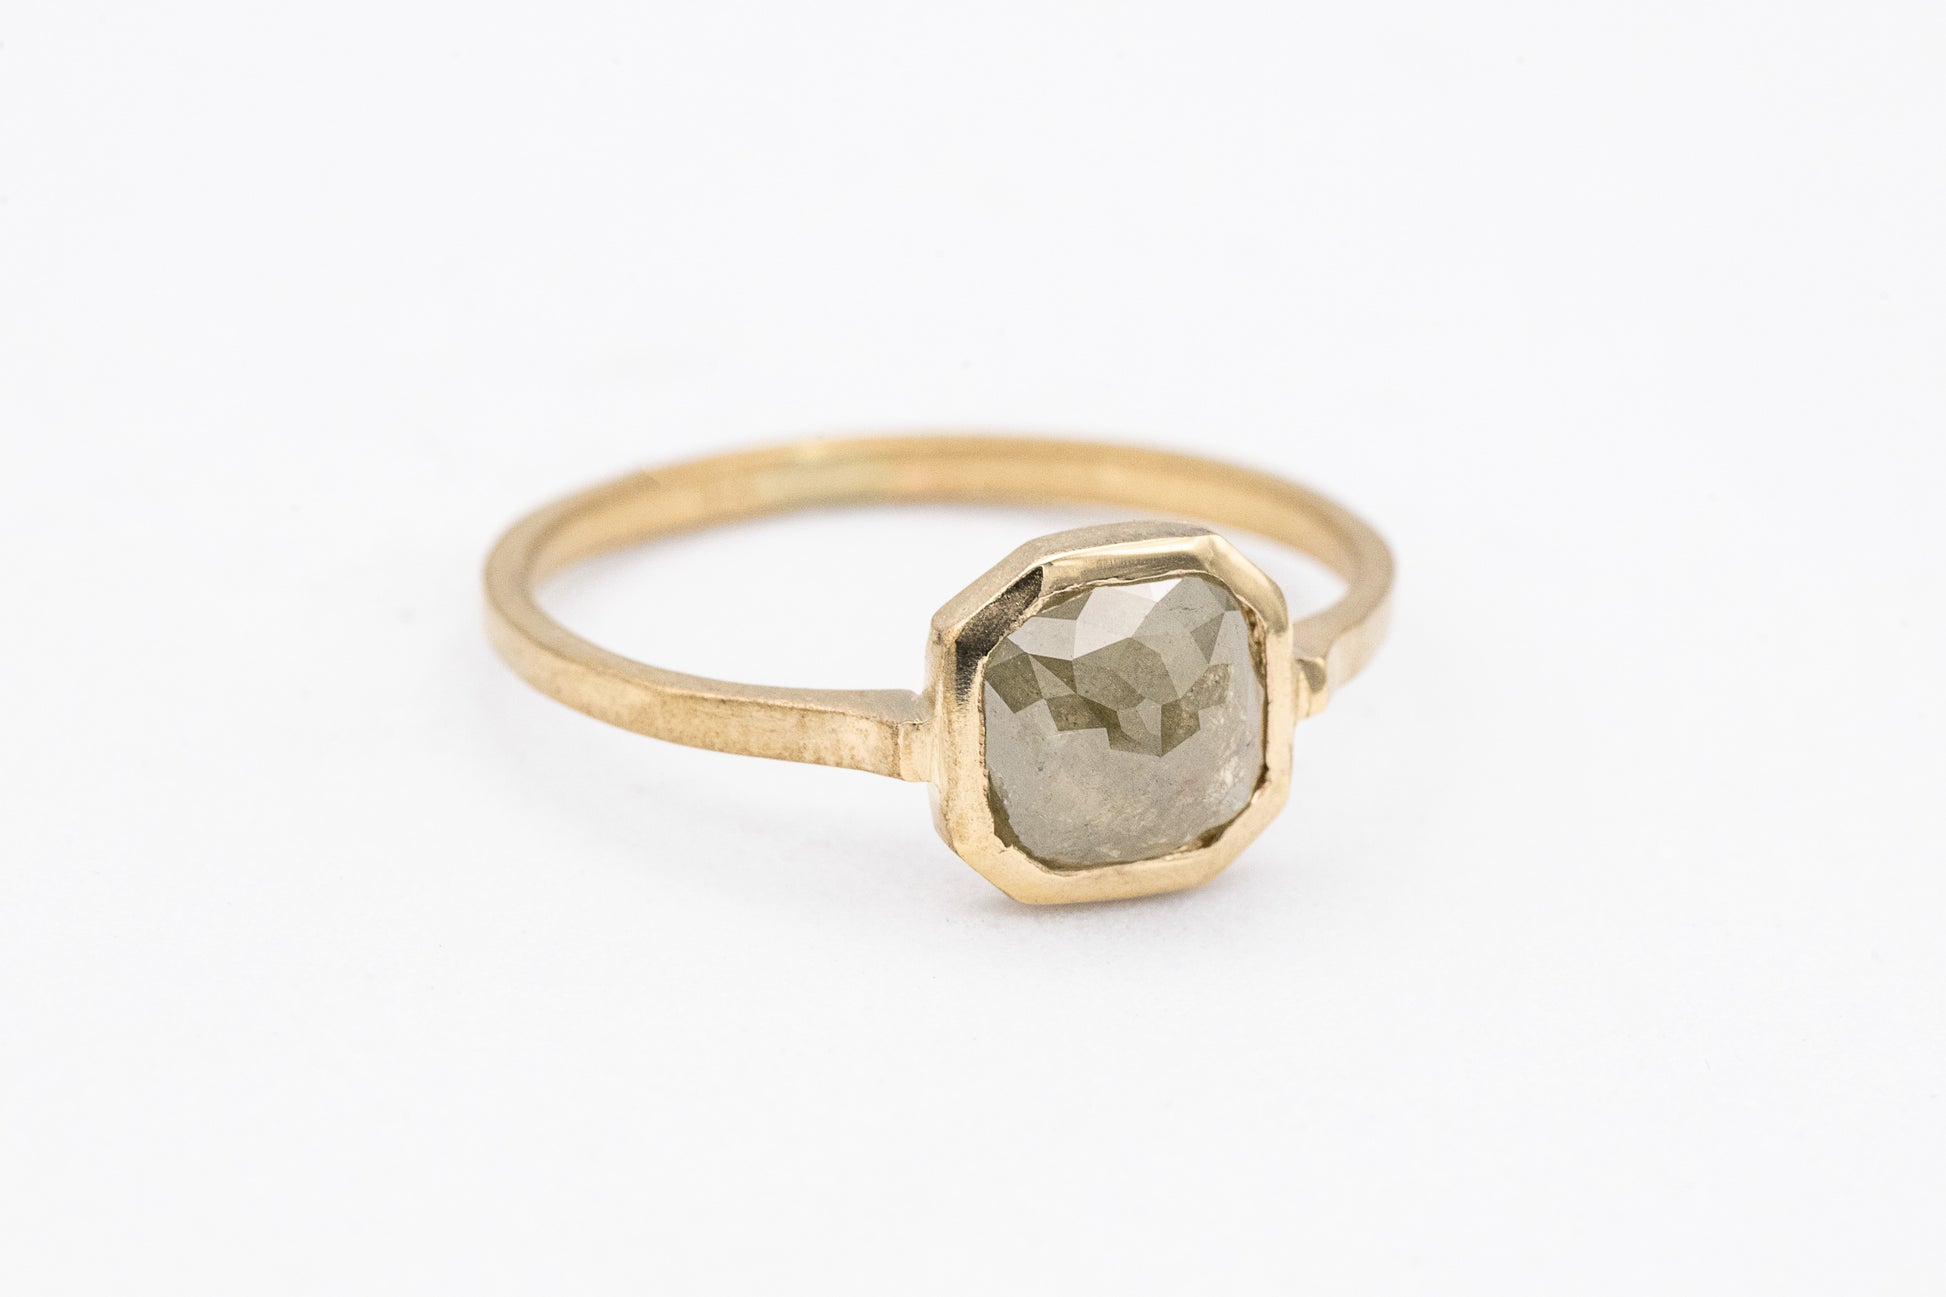 A handmade Rose Cut Gray Diamond Ring in 14k Yellow Gold by Cassin Jewelry.